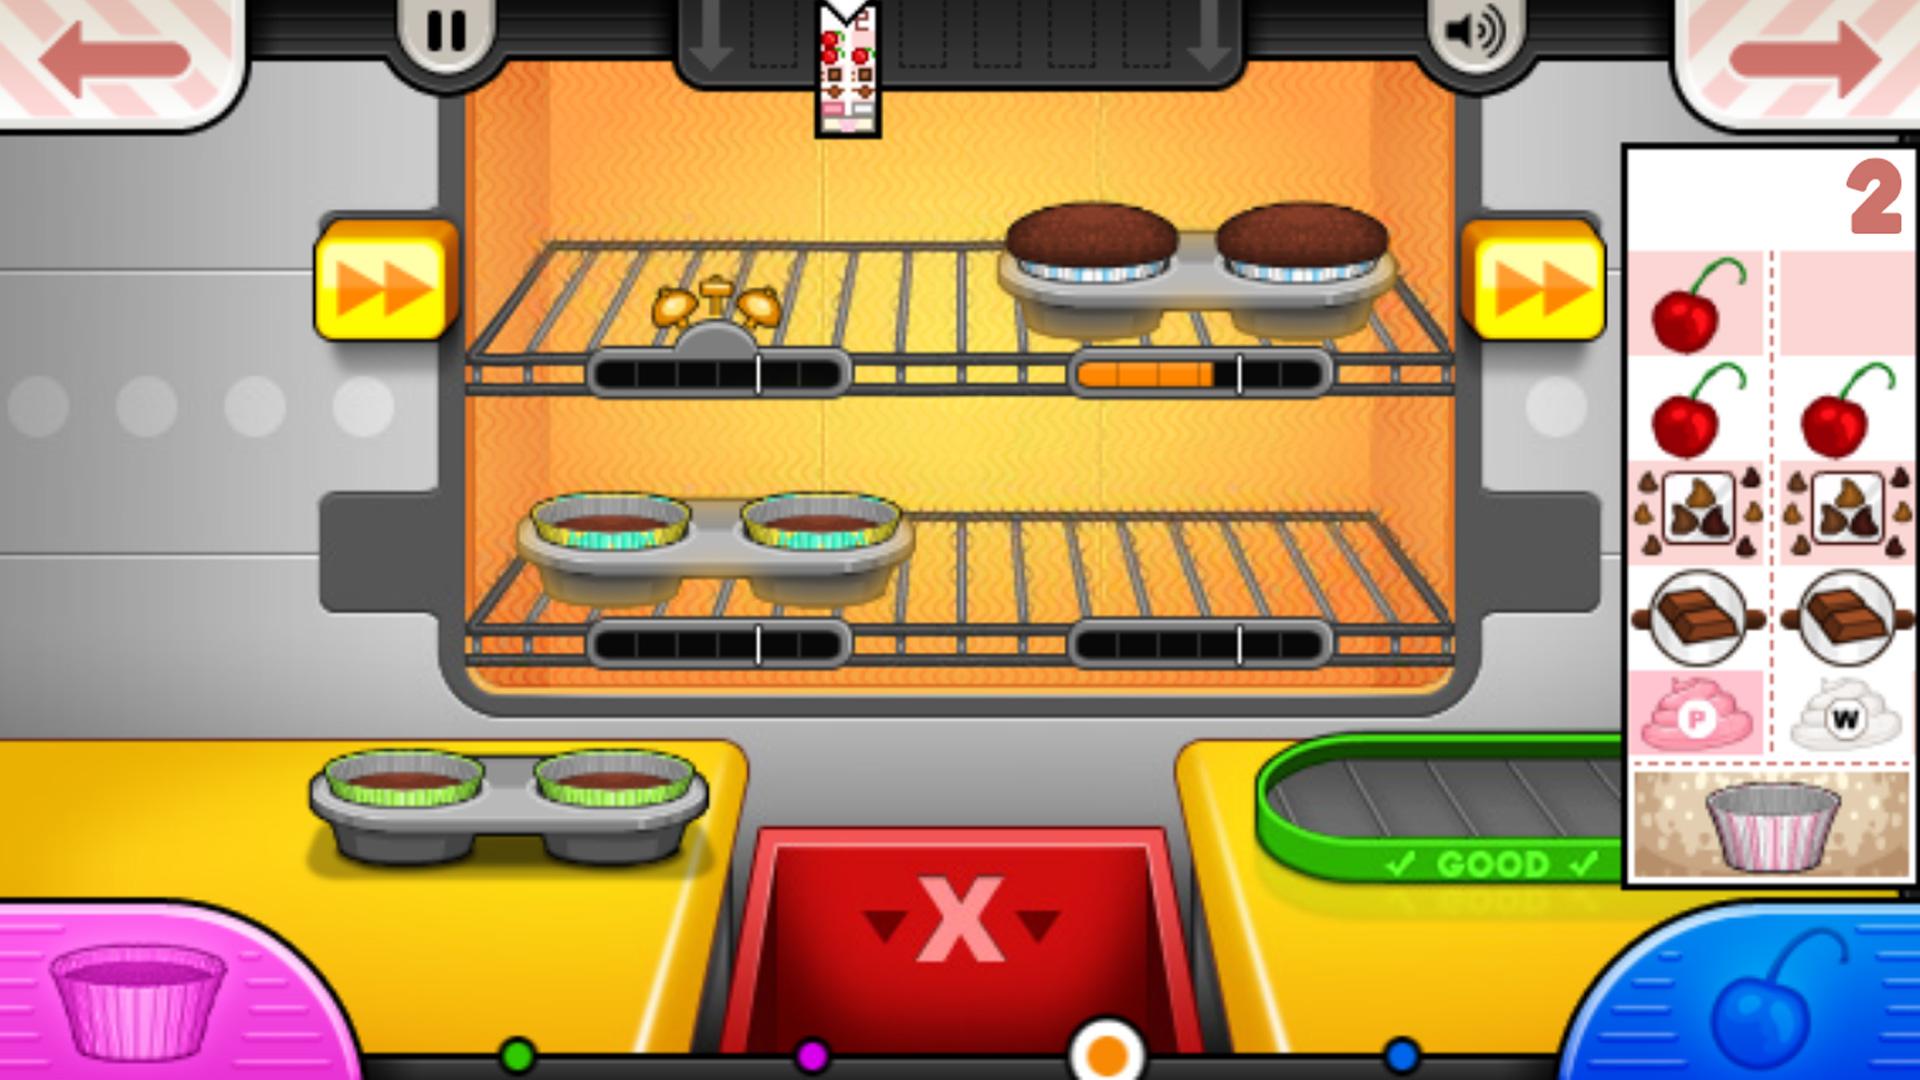 Papas Cupcakeria HD for Android - Download